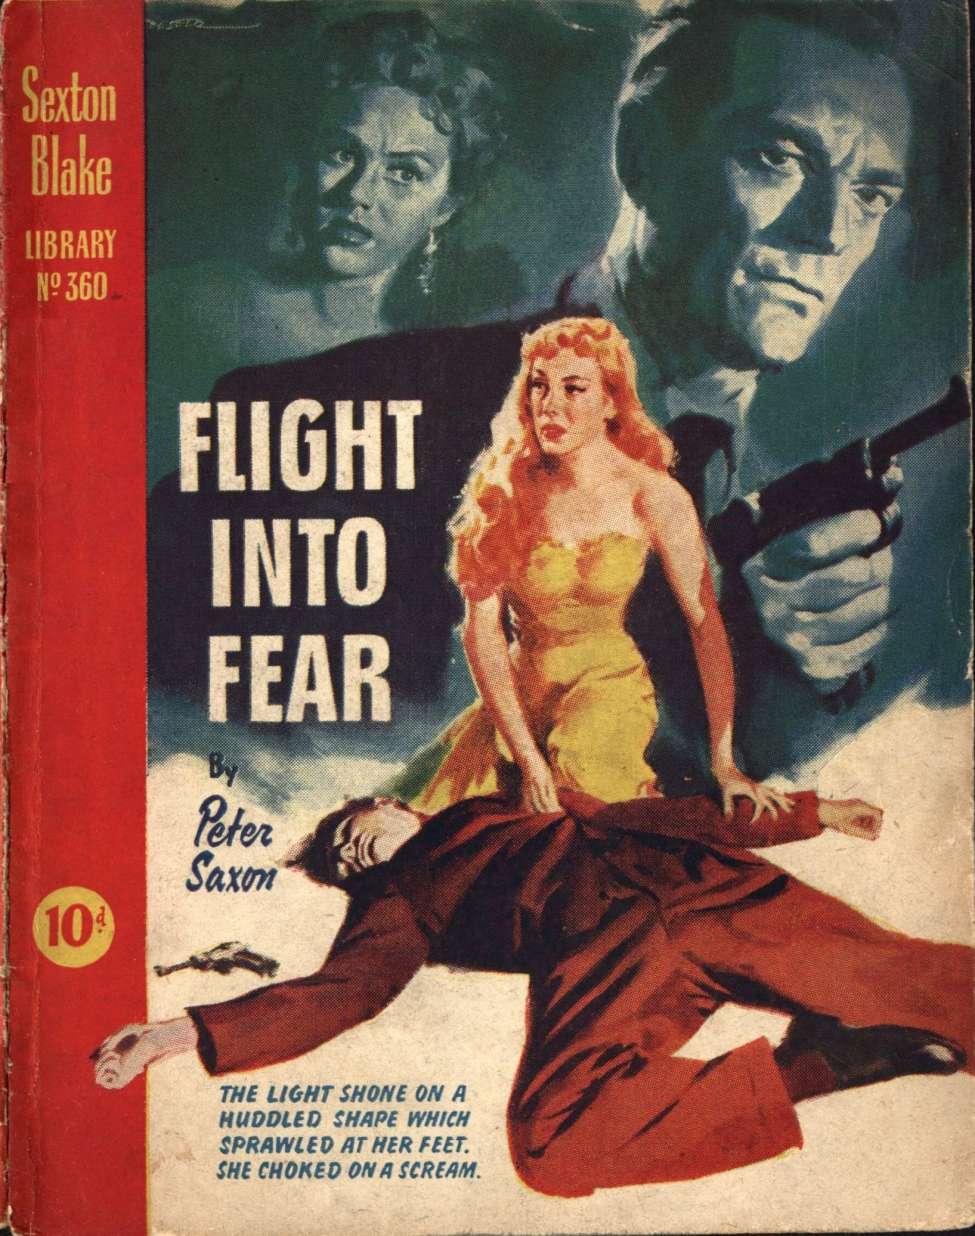 Book Cover For Sexton Blake Library S4 360 - Flight into Fear